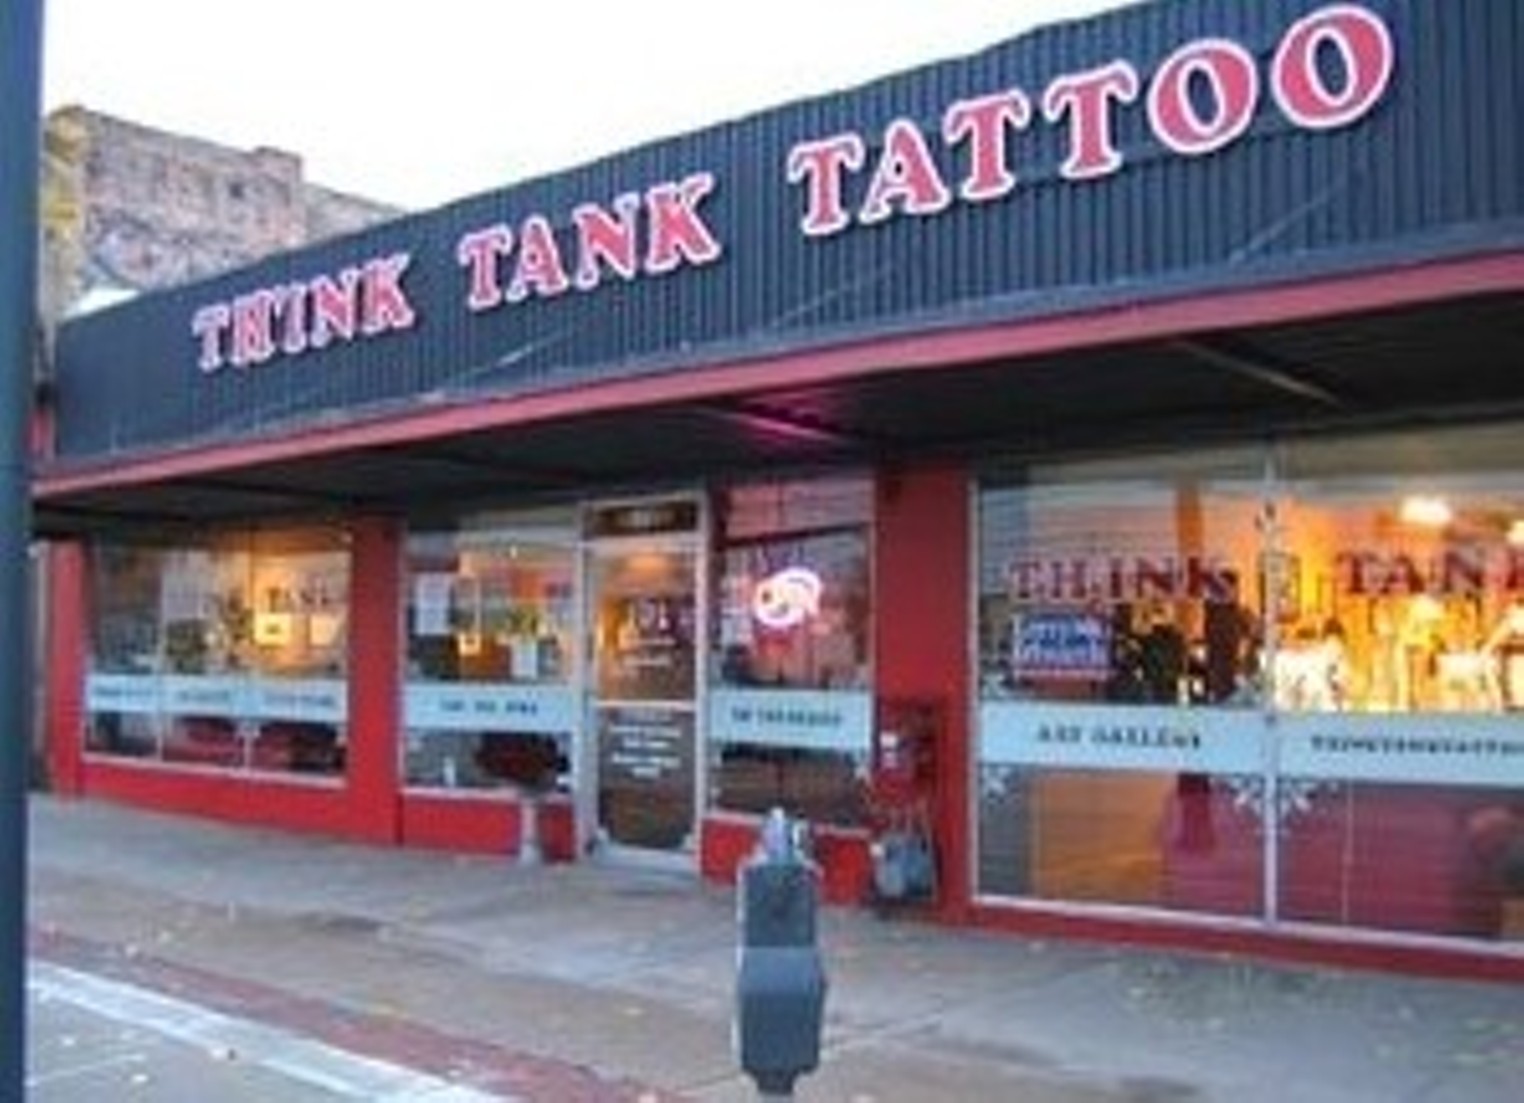 Readers' Choice: Best name for a tattoo shop